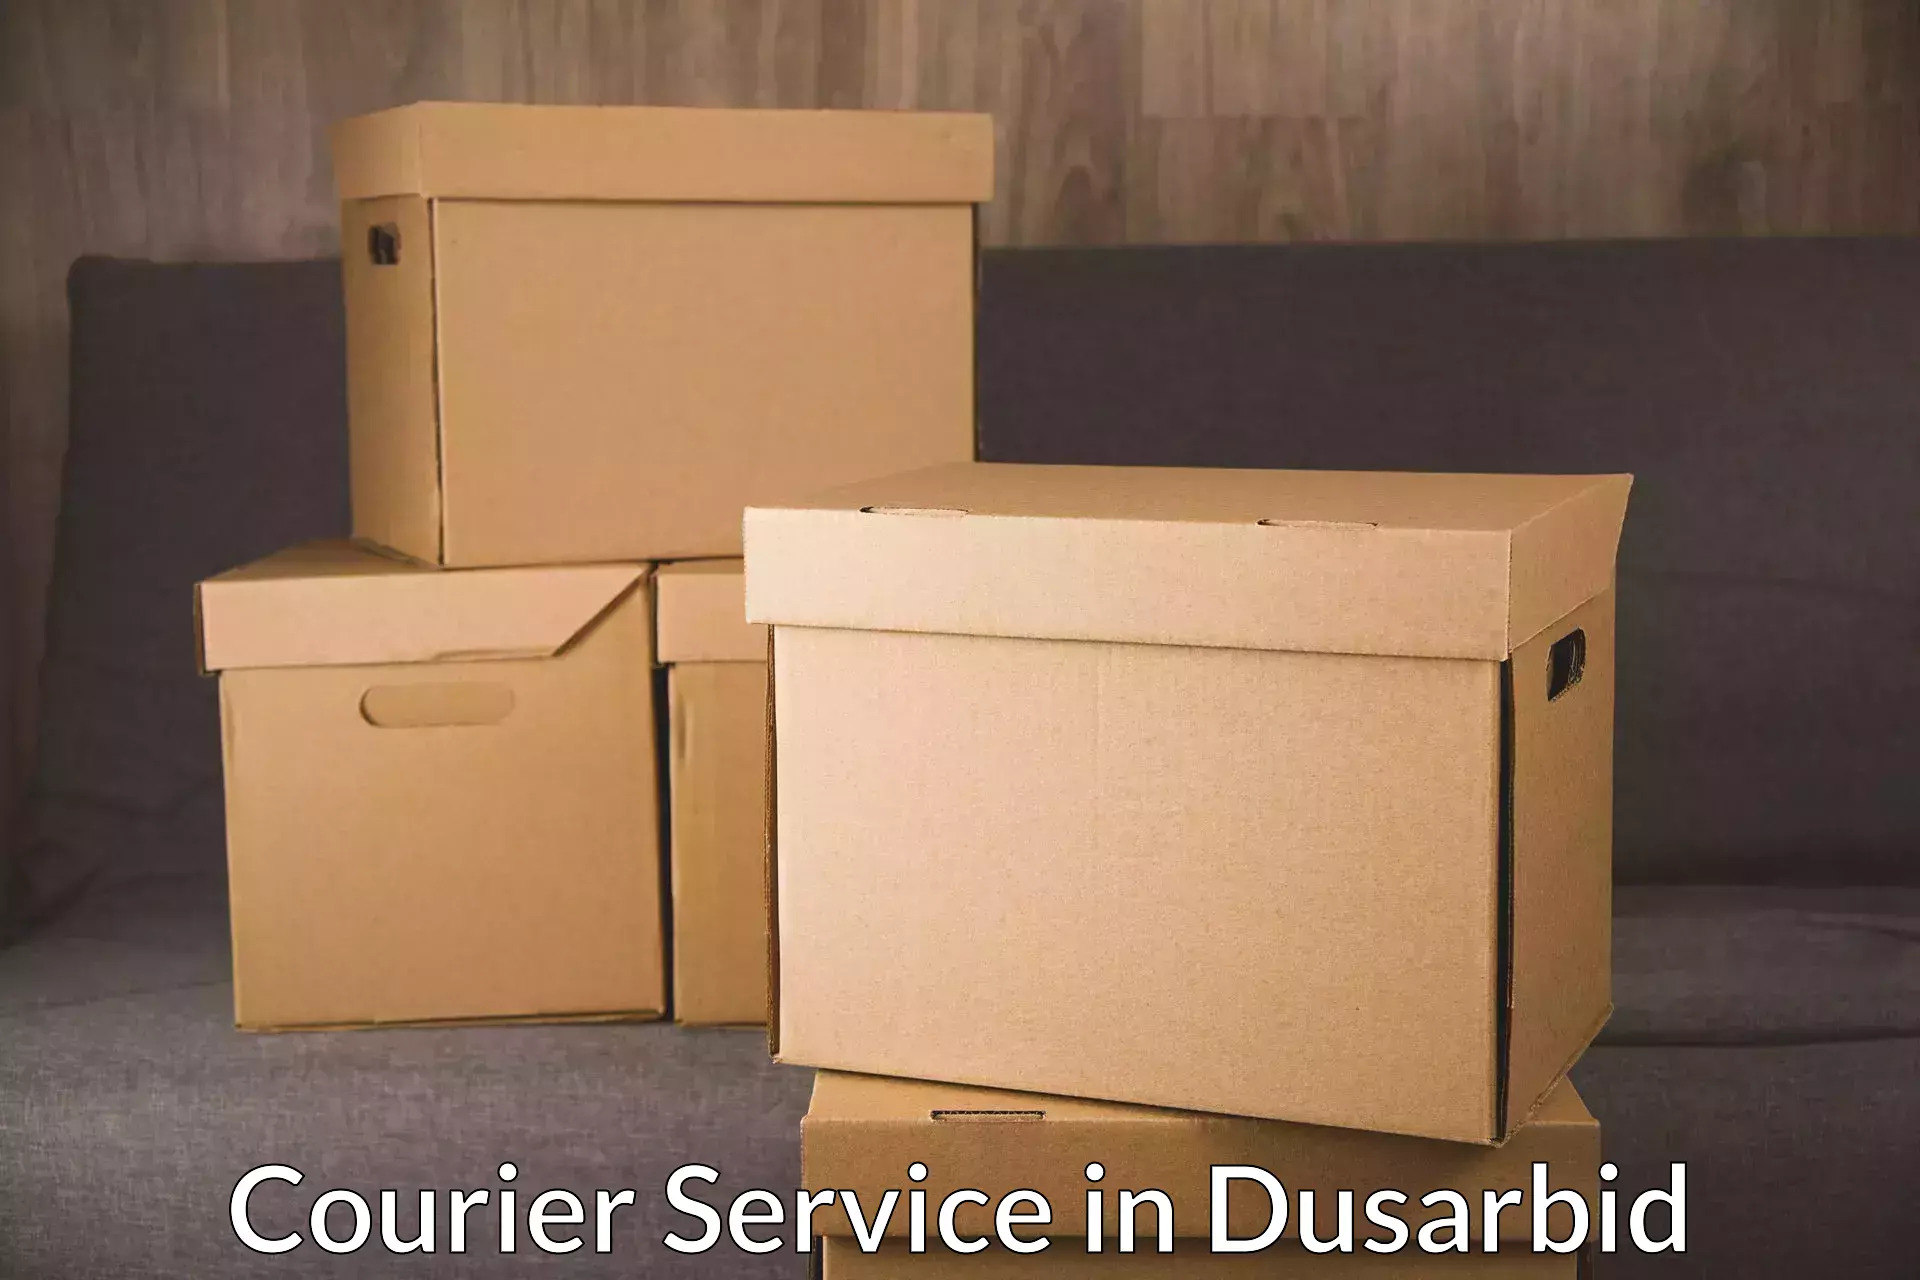 Expedited shipping methods in Dusarbid